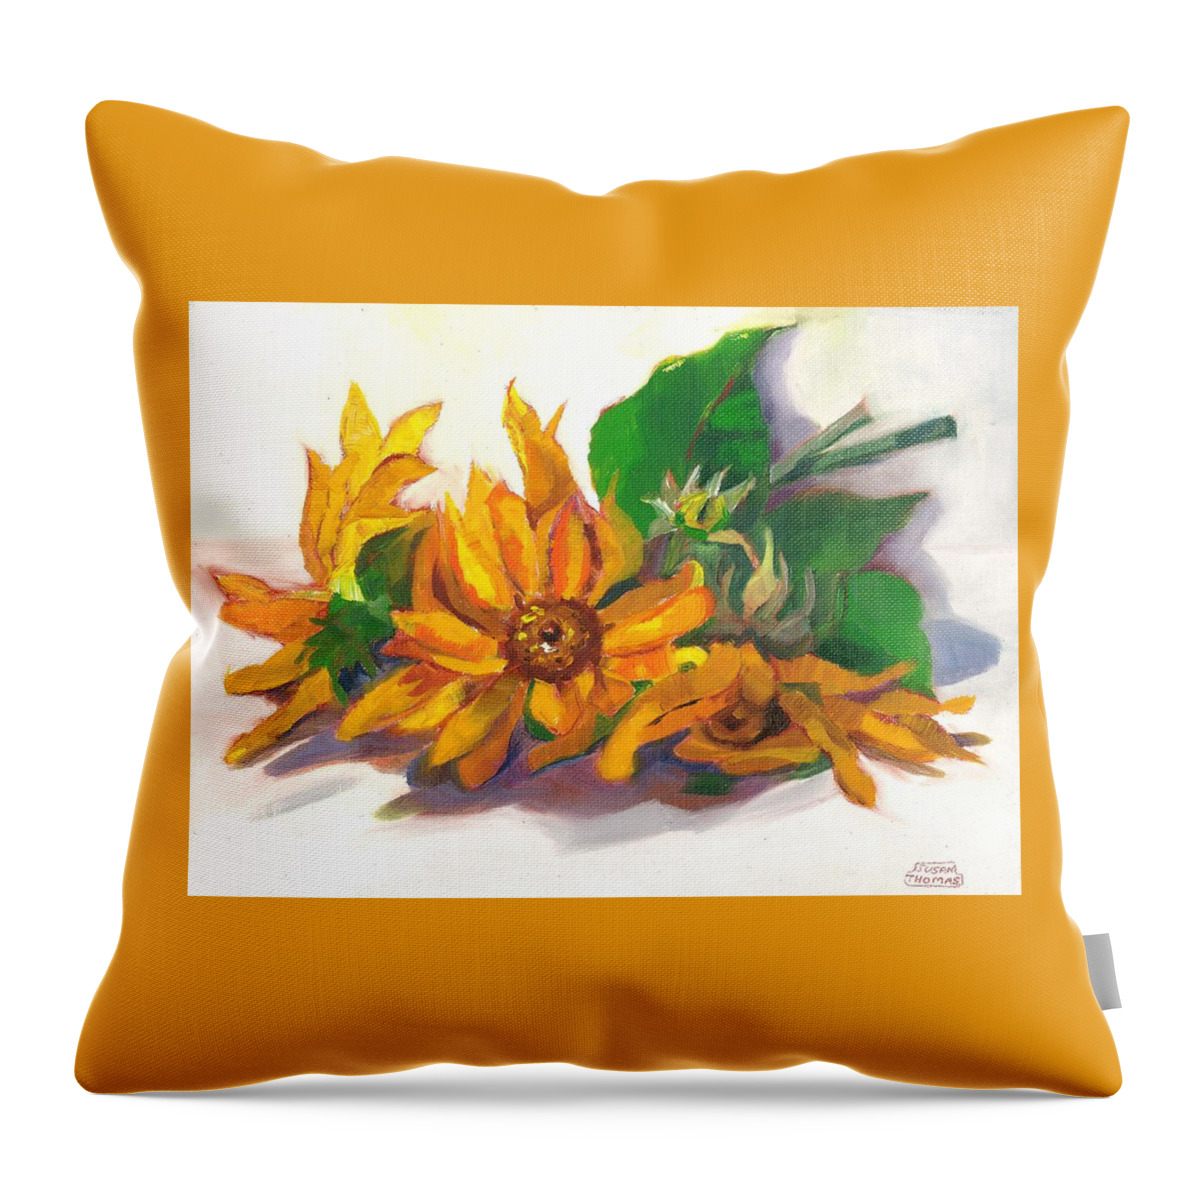 Sunflowers Throw Pillow featuring the painting Three Sunflowers by Susan Thomas